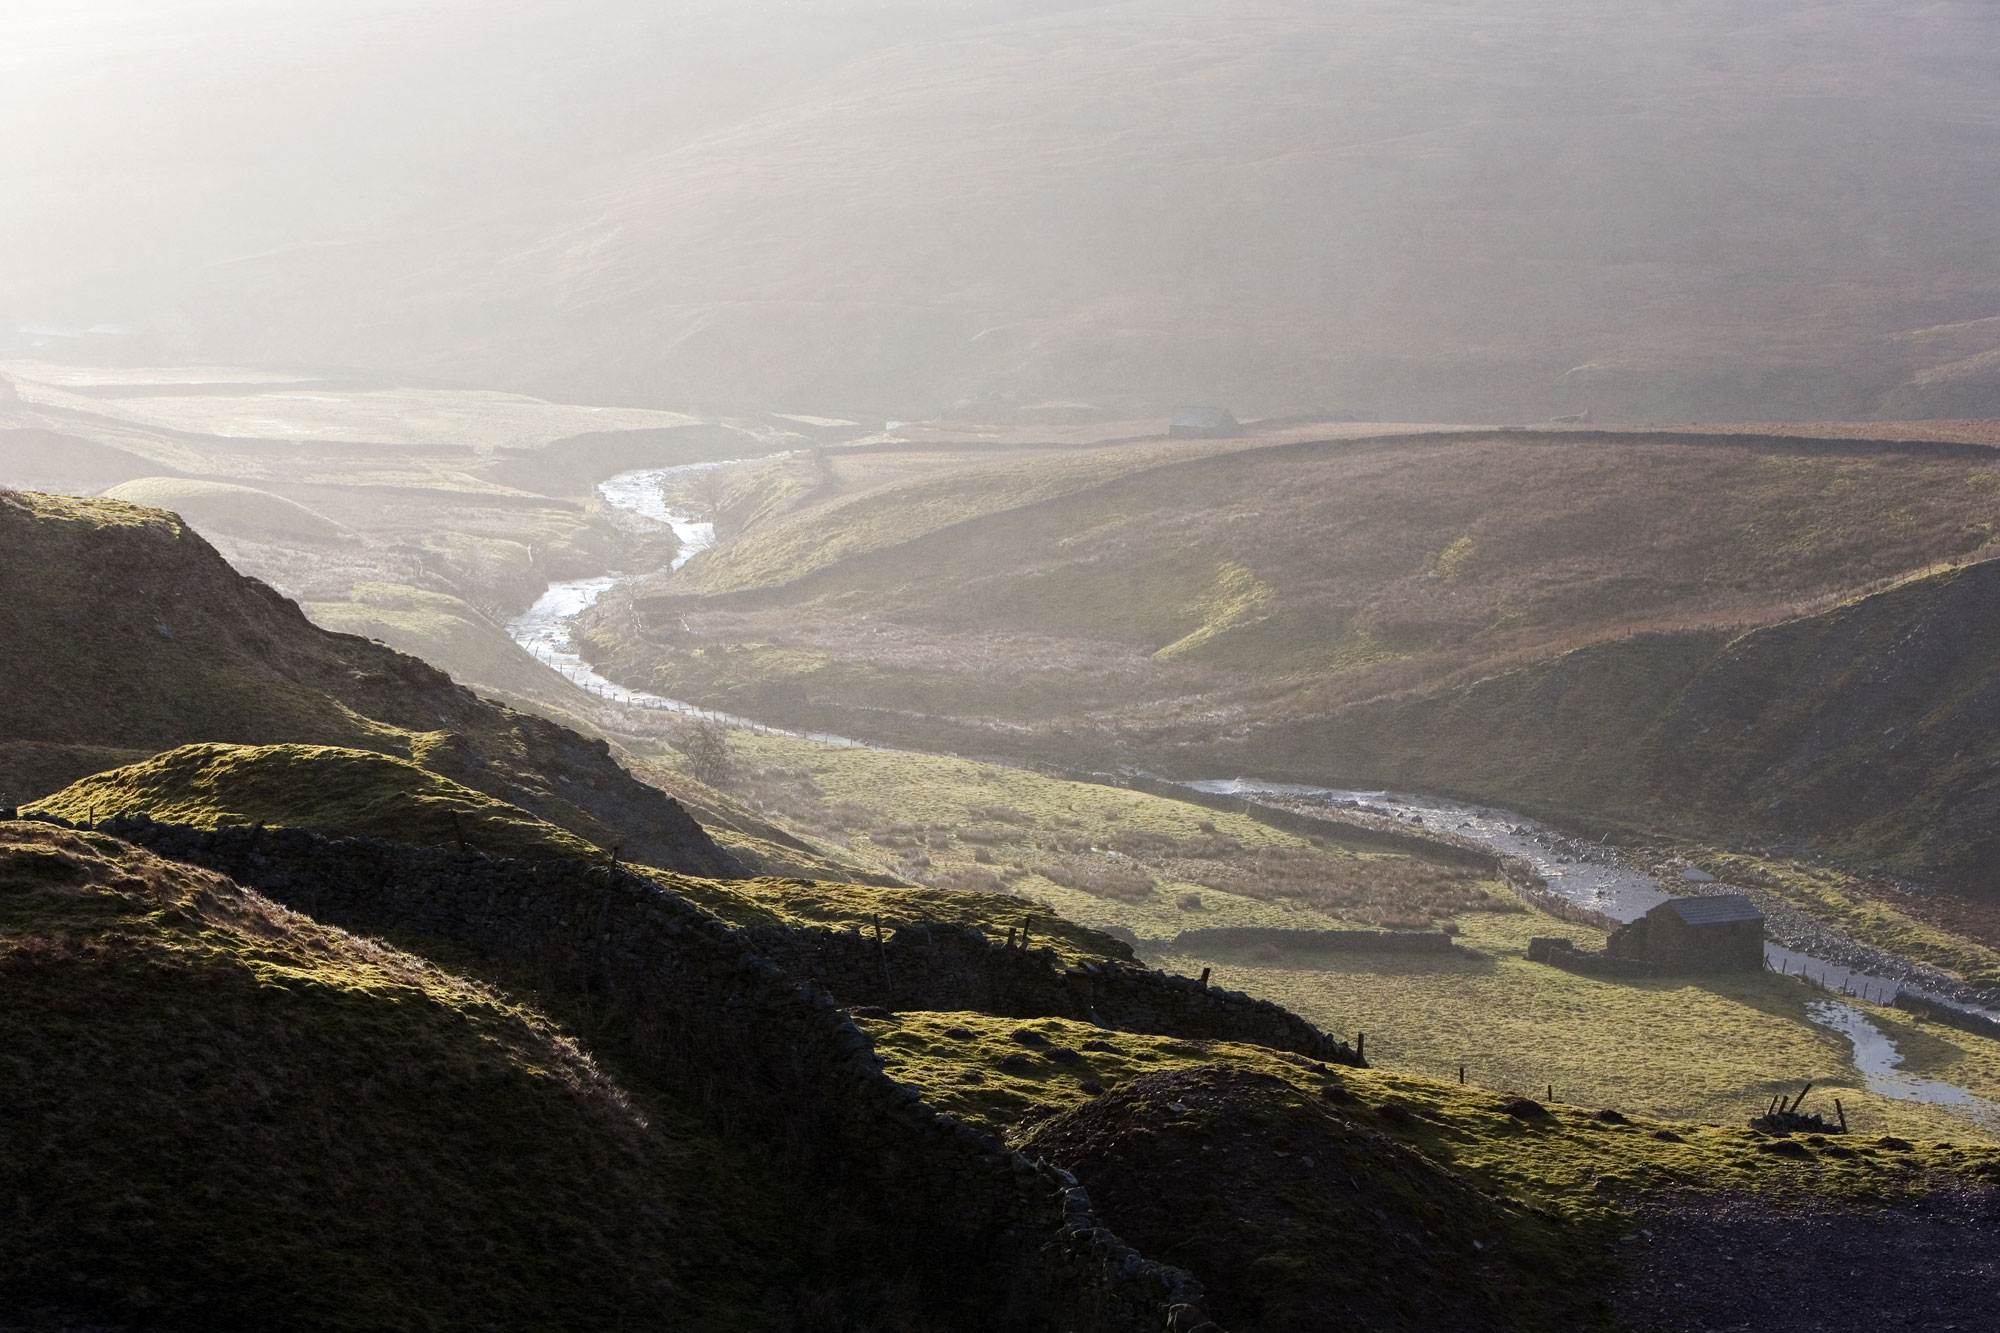 The glorious Yorkshire Dales National Park